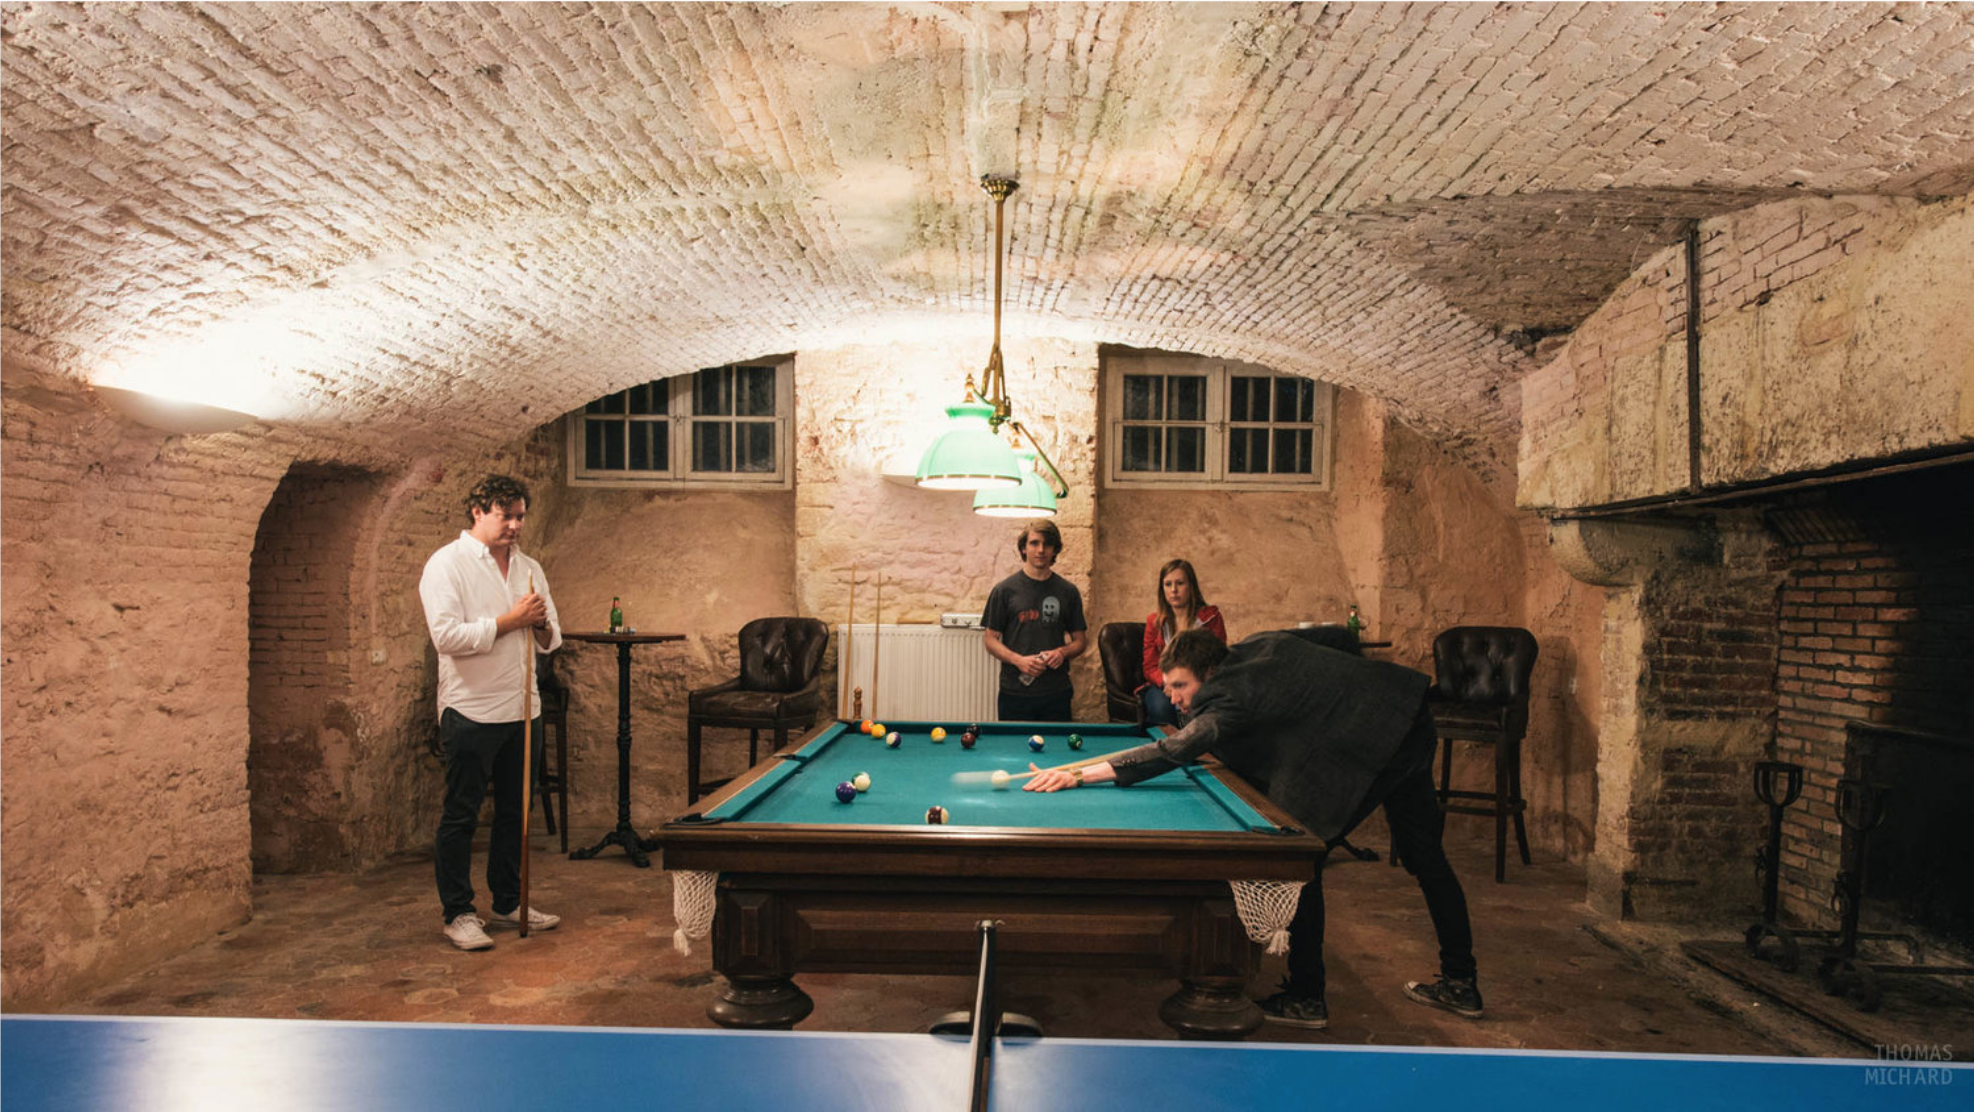 A group of people playing pool in the games room during a weekend break at Chateau de Courtomer in Normandy, France.